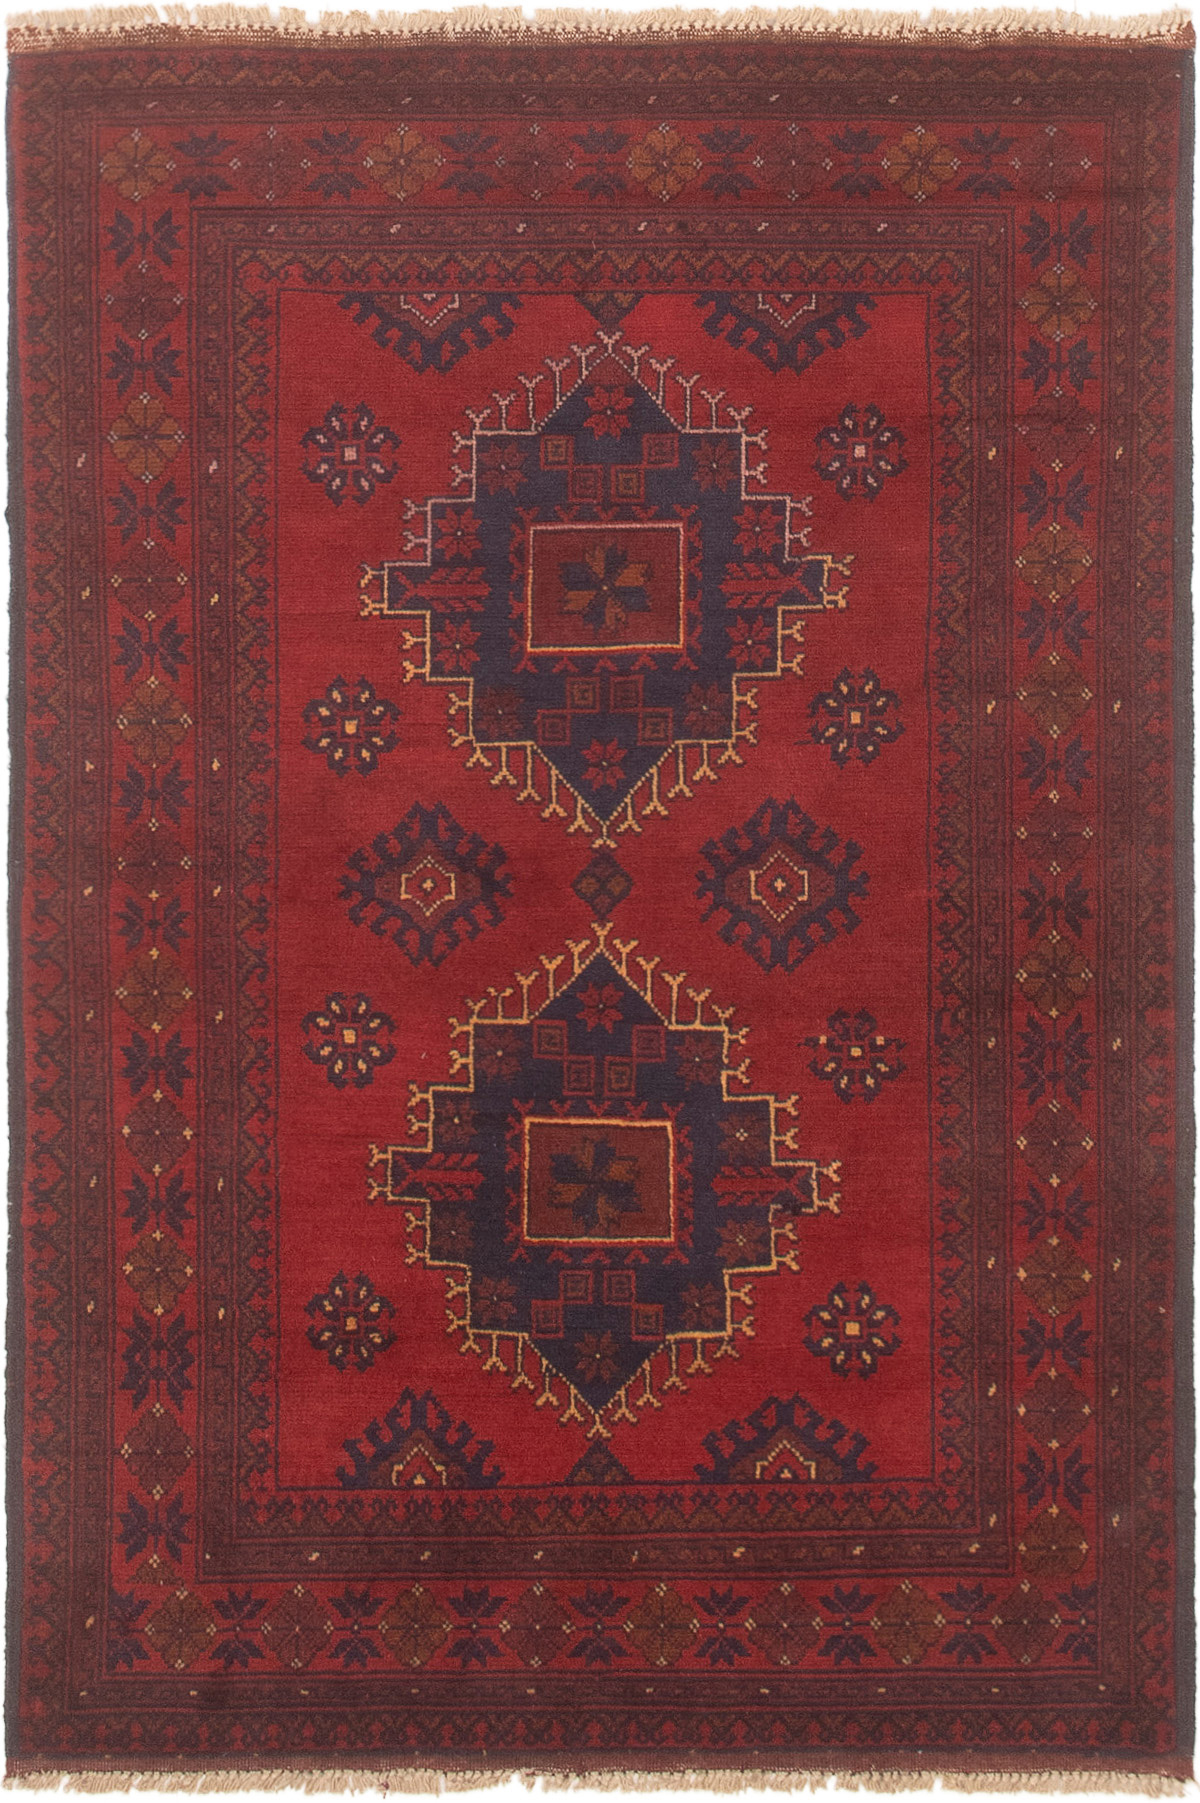 Hand-knotted Finest Khal Mohammadi Red Wool Rug 3'3" x 4'11" (46) Size: 3'3" x 4'11"  